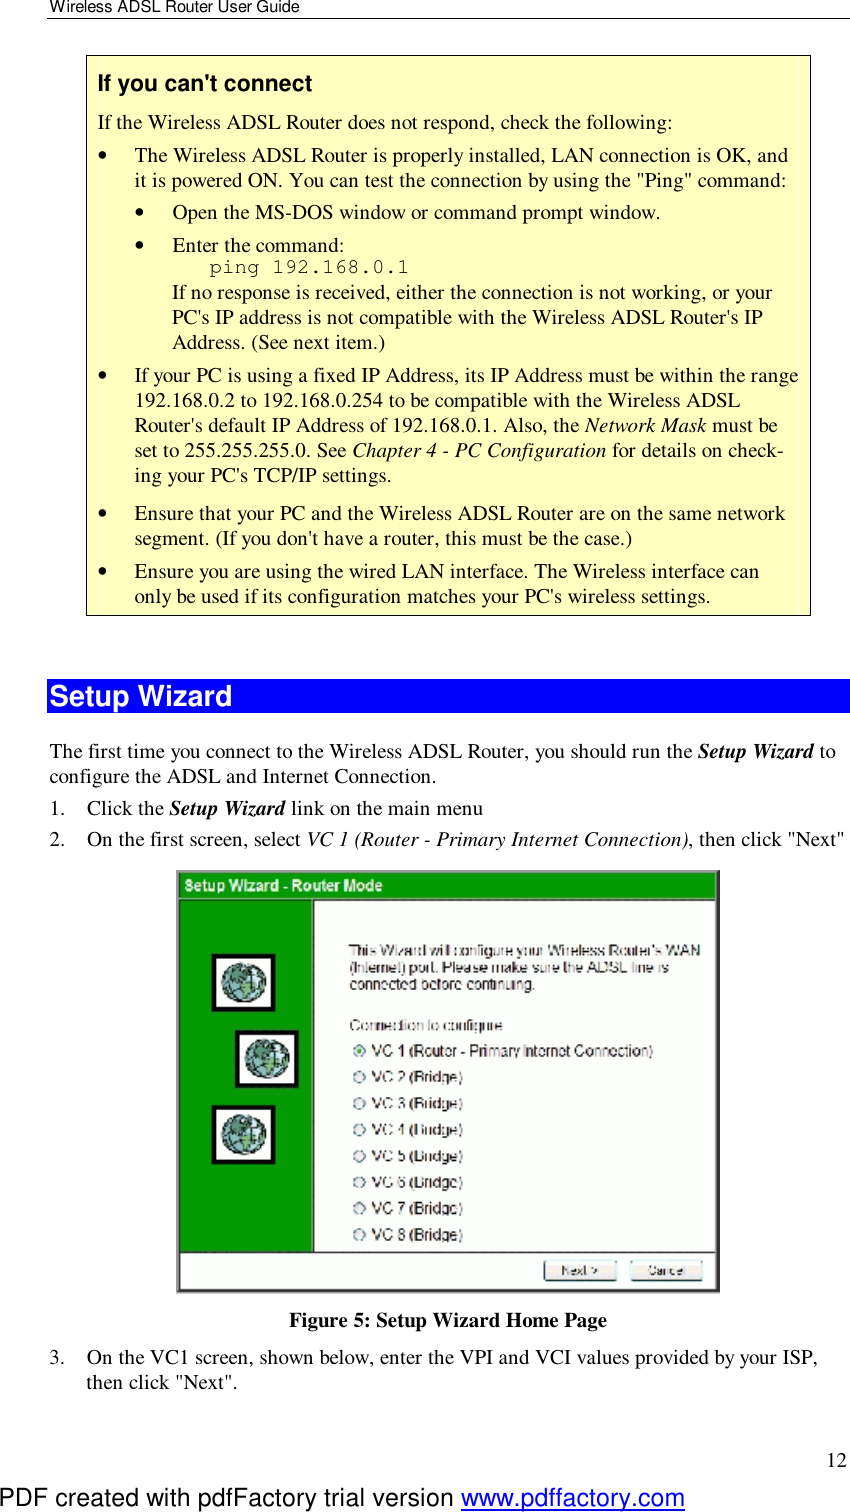 Wireless ADSL Router User Guide 12 If you can&apos;t connect If the Wireless ADSL Router does not respond, check the following: •  The Wireless ADSL Router is properly installed, LAN connection is OK, and it is powered ON. You can test the connection by using the &quot;Ping&quot; command: •  Open the MS-DOS window or command prompt window. •  Enter the command:    ping 192.168.0.1 If no response is received, either the connection is not working, or your PC&apos;s IP address is not compatible with the Wireless ADSL Router&apos;s IP Address. (See next item.) •  If your PC is using a fixed IP Address, its IP Address must be within the range 192.168.0.2 to 192.168.0.254 to be compatible with the Wireless ADSL Router&apos;s default IP Address of 192.168.0.1. Also, the Network Mask must be set to 255.255.255.0. See Chapter 4 - PC Configuration for details on check-ing your PC&apos;s TCP/IP settings. •  Ensure that your PC and the Wireless ADSL Router are on the same network segment. (If you don&apos;t have a router, this must be the case.)  •  Ensure you are using the wired LAN interface. The Wireless interface can only be used if its configuration matches your PC&apos;s wireless settings.  Setup Wizard The first time you connect to the Wireless ADSL Router, you should run the Setup Wizard to configure the ADSL and Internet Connection. 1. Click the Setup Wizard link on the main menu 2. On the first screen, select VC 1 (Router - Primary Internet Connection), then click &quot;Next&quot;  Figure 5: Setup Wizard Home Page 3. On the VC1 screen, shown below, enter the VPI and VCI values provided by your ISP, then click &quot;Next&quot;. PDF created with pdfFactory trial version www.pdffactory.com